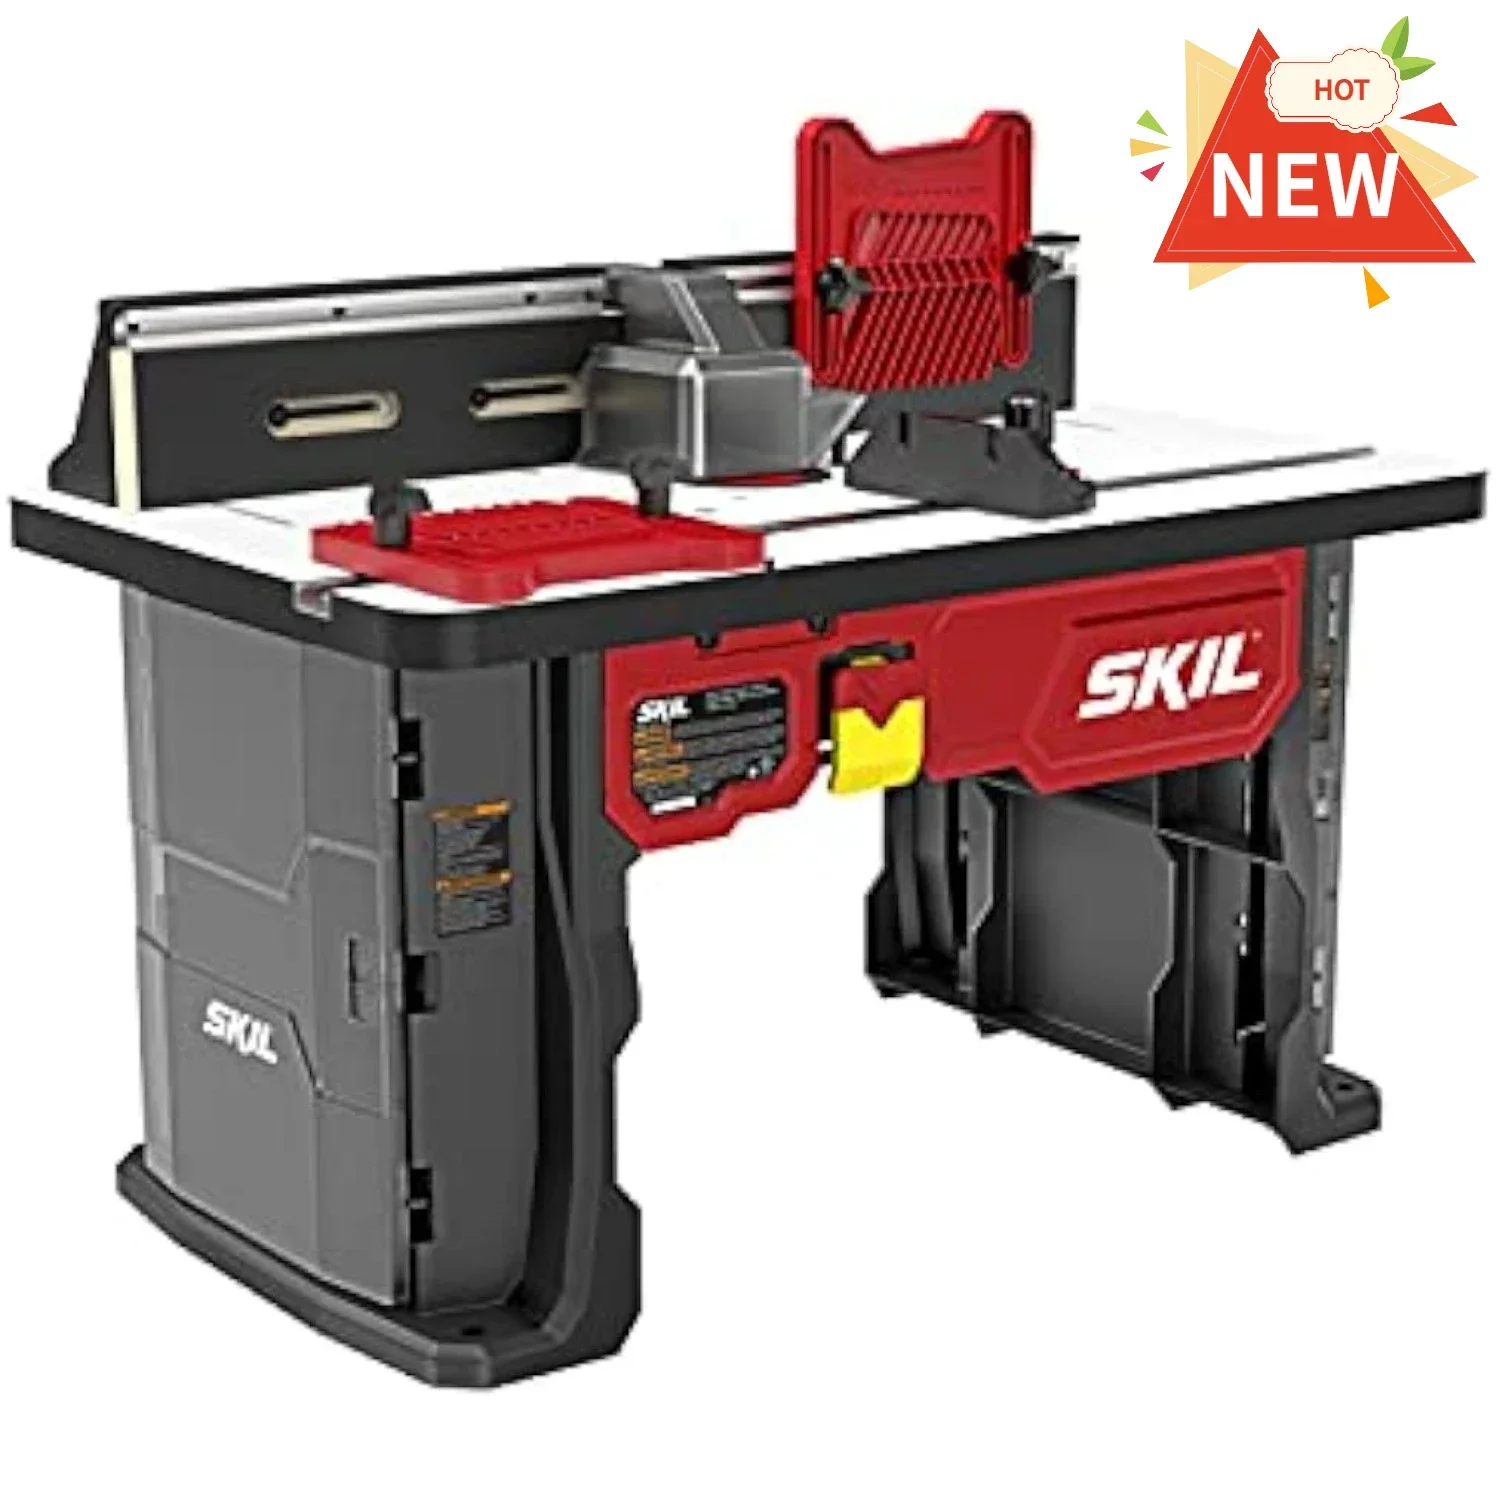 

SRT1039 Benchtop Portable Router Table with Dual Sided Integrated Bit Storage | USA